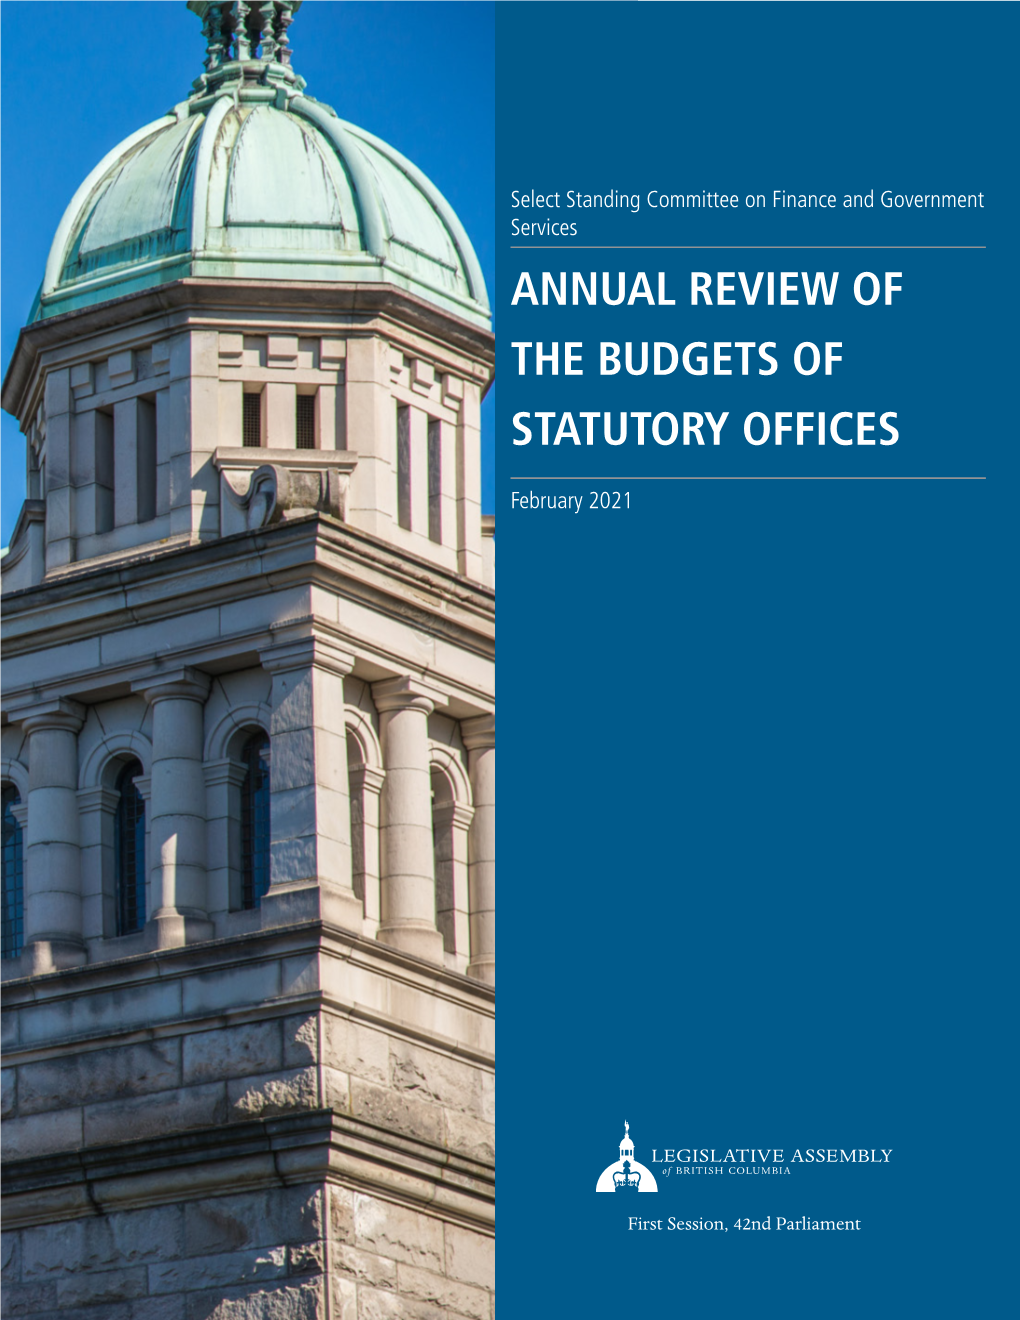 Annual Review of the Budgets of Statutory Offices